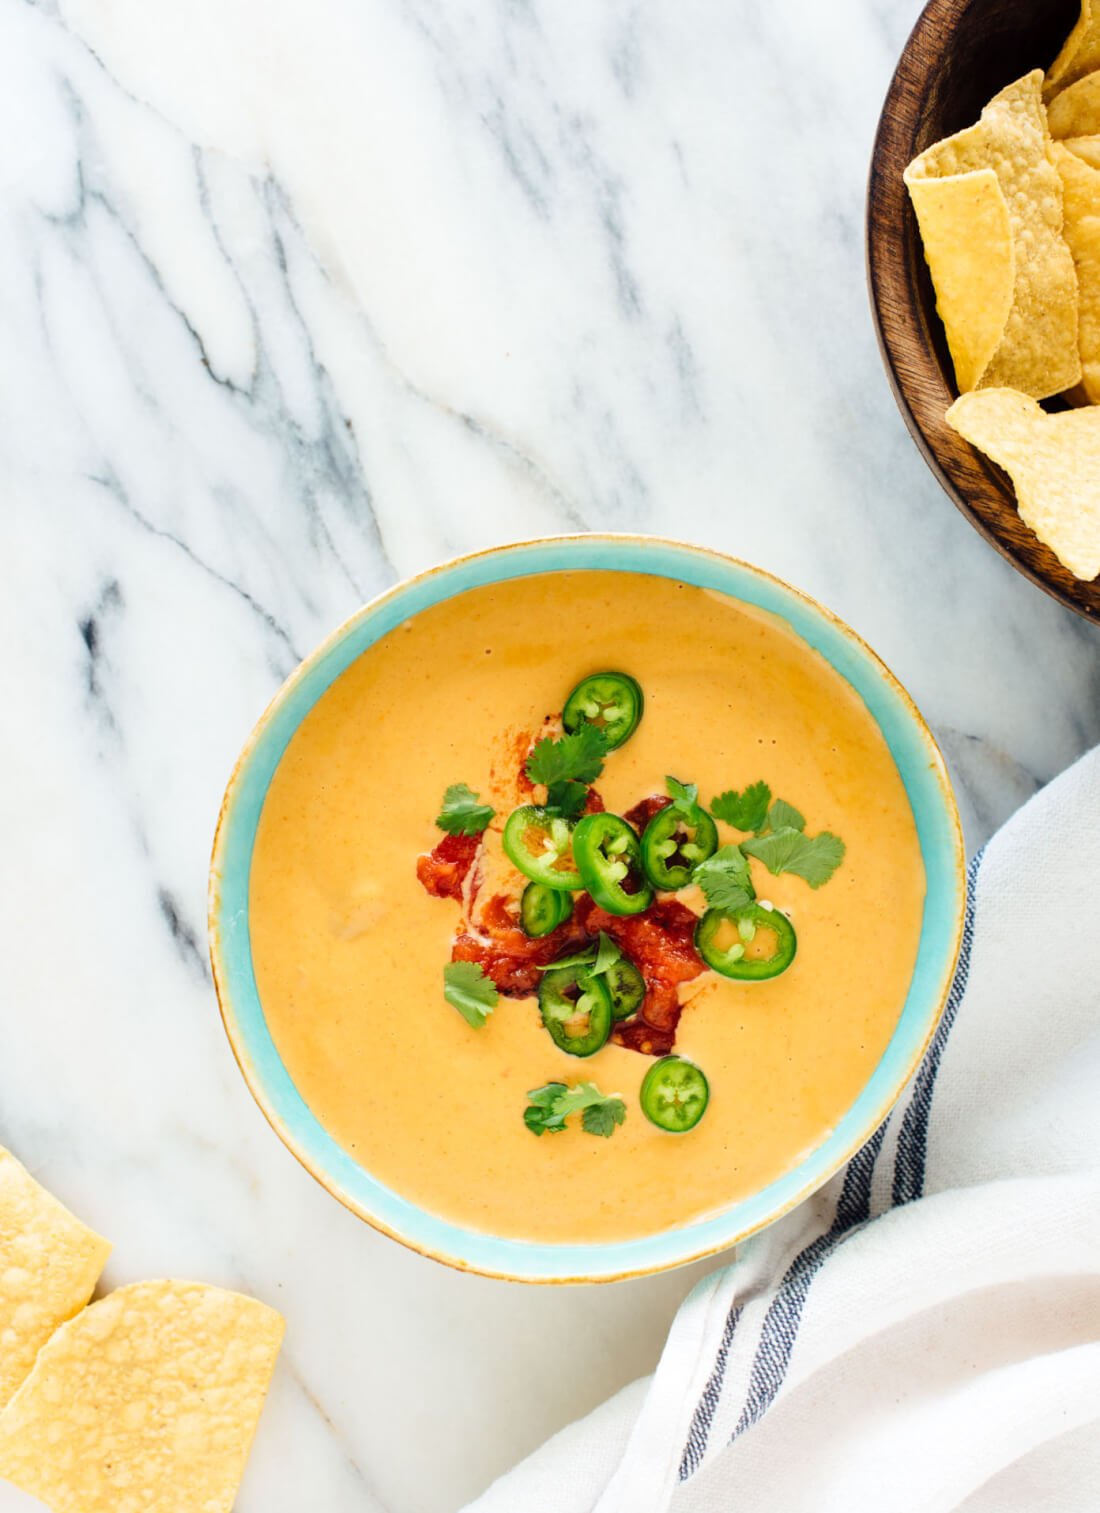 This delicious dairy-free queso recipe is made with cashews and potatoes instead of cheese, but you'd never guess it! cookieandkate.com